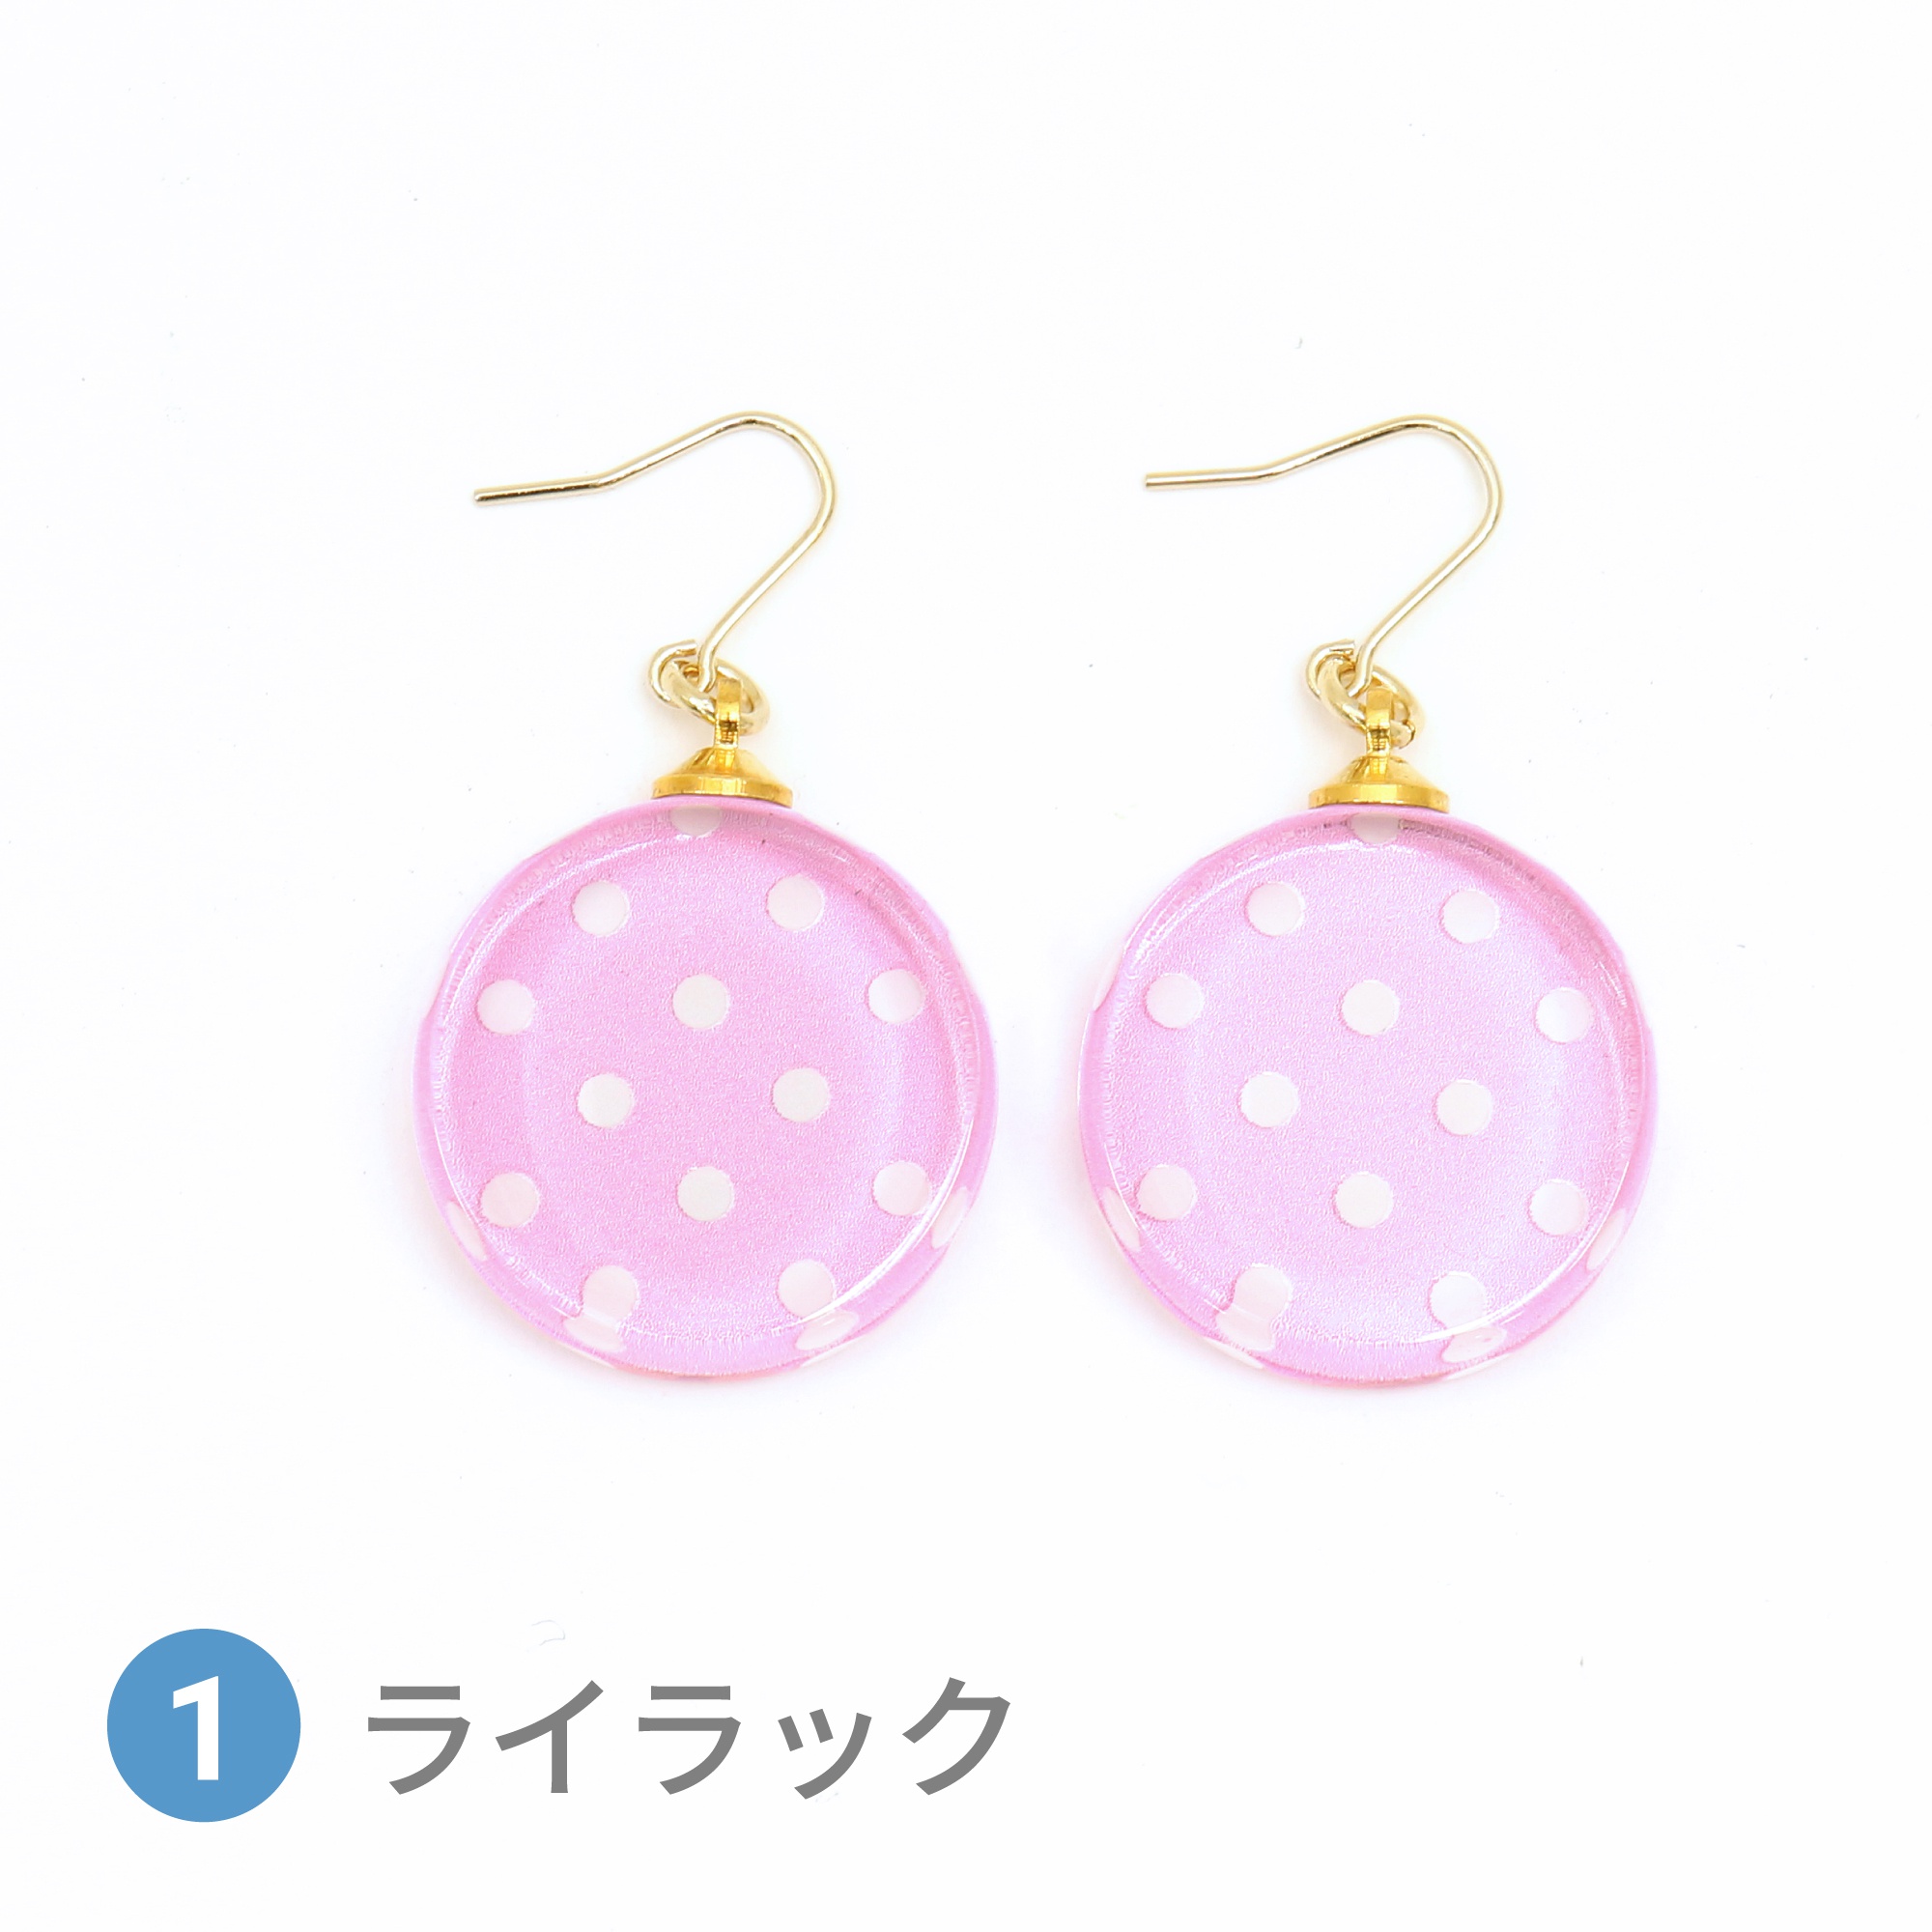 Glass accessories Pierced Earring DOT lilac round shape